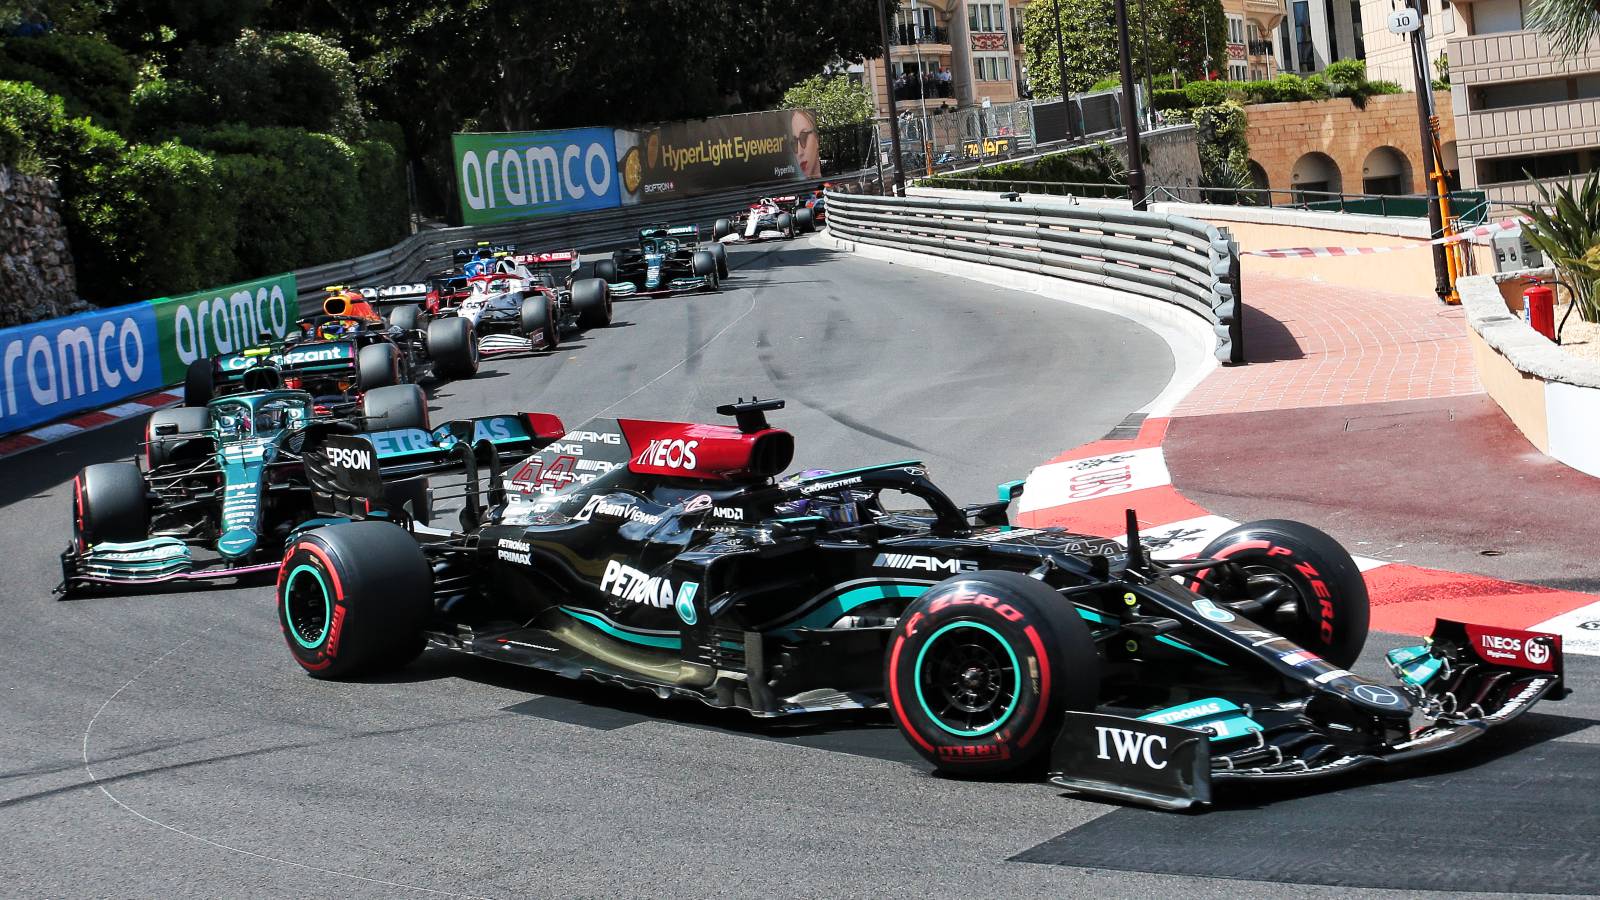 Lewis Hamilton, Mercedes, leads the pack. Monaco May 2021.